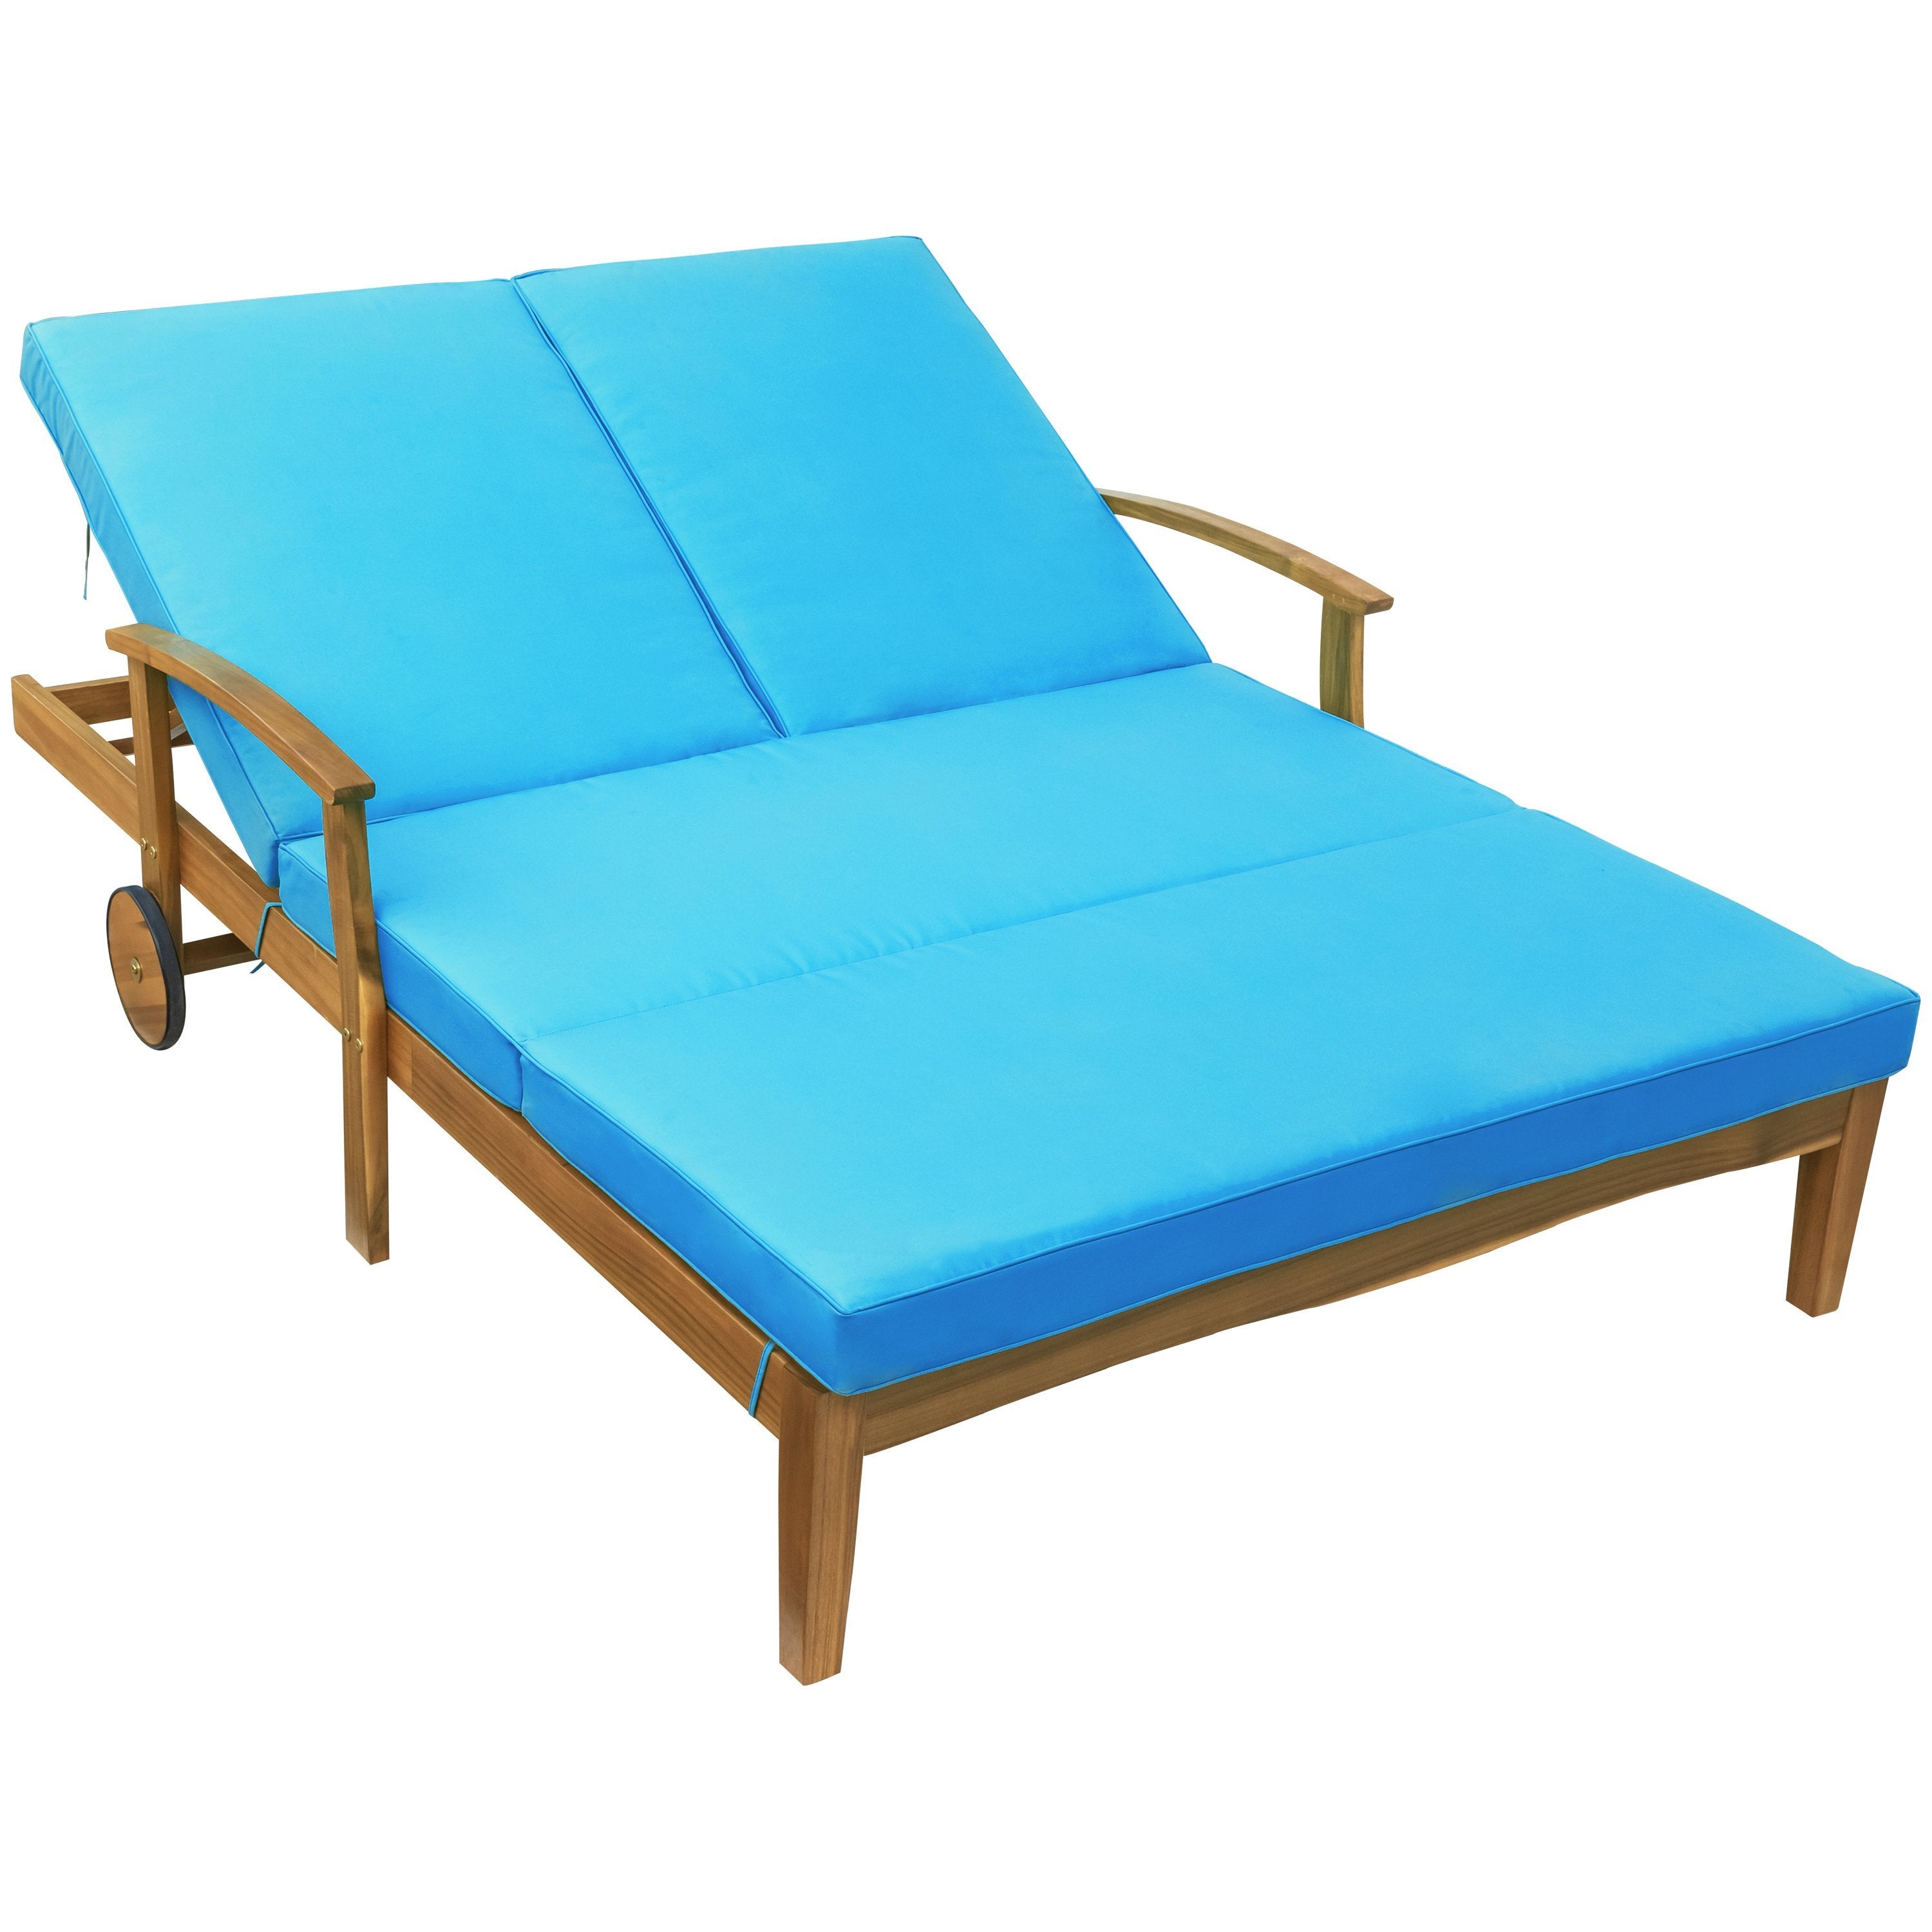 Outdoor Double Chaise Lounge Chair for 2 Persons Patio Backyard Solid Wood Frame Daybed with Cushion and Wheels,Natural Wood Finish+Blue Cushion-Boyel Living